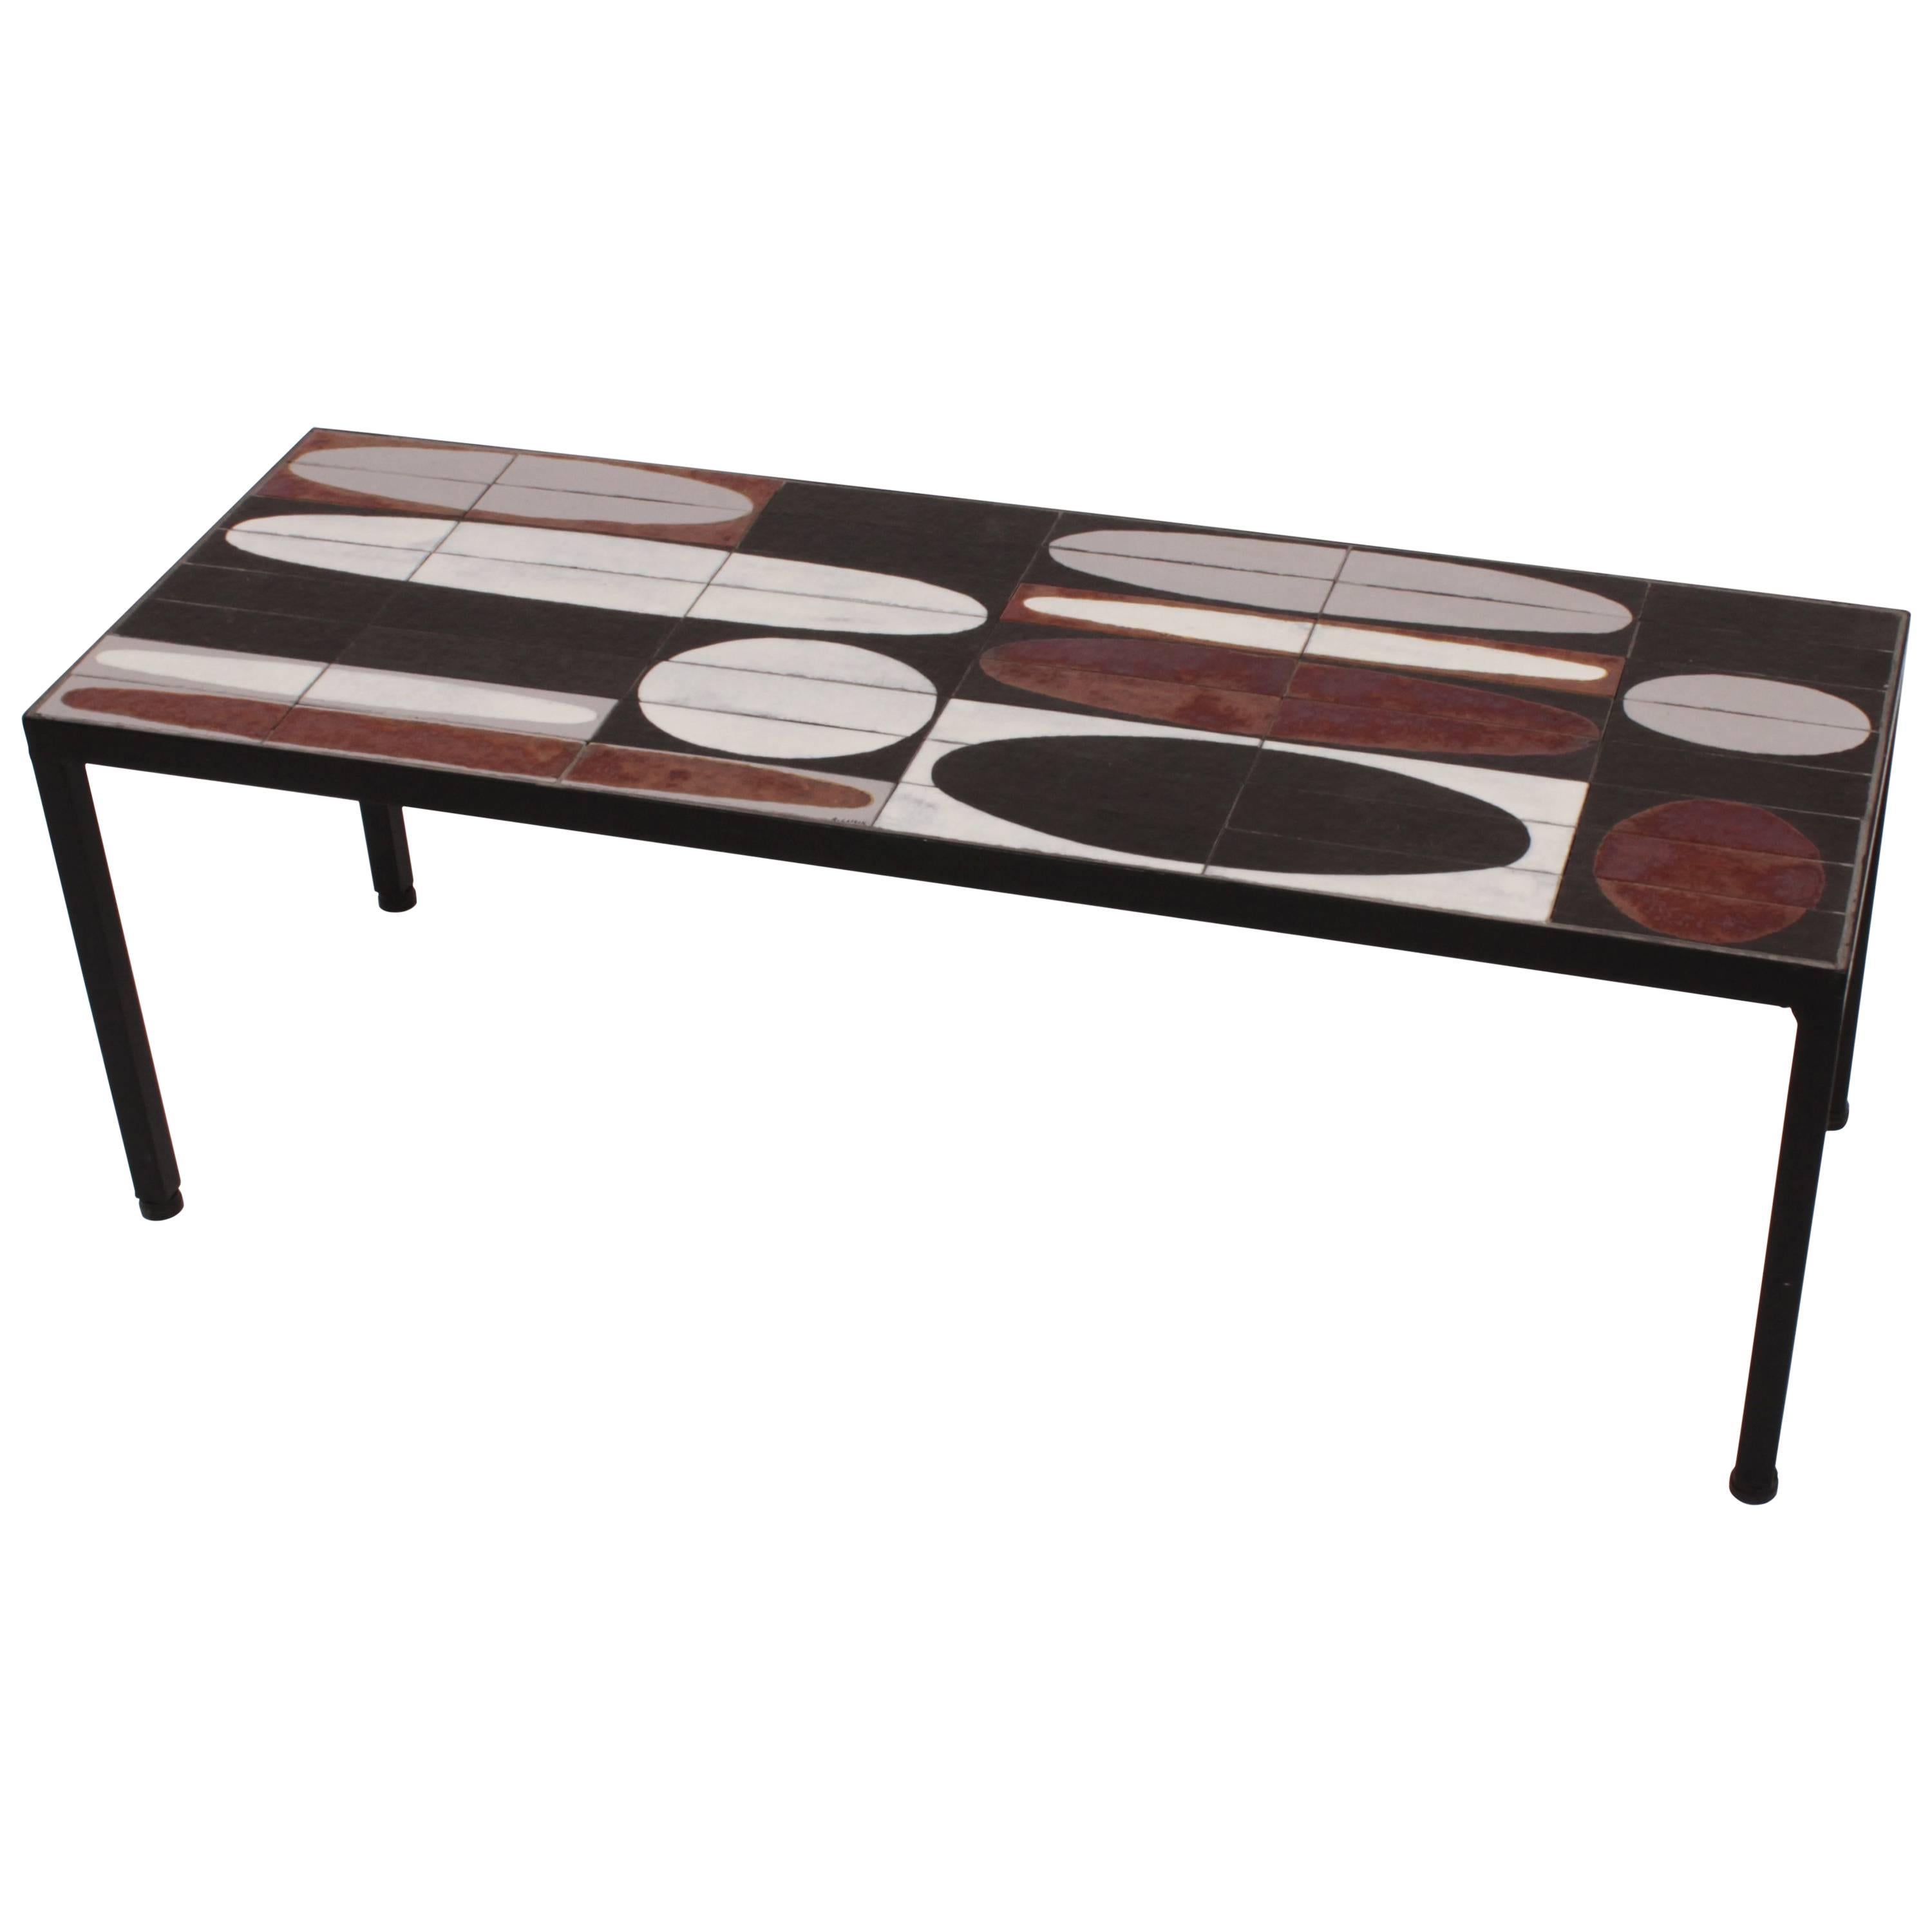 Coffee Table "Ellipse", Enameled Slate Tiles by Roger Capron, Vallauris